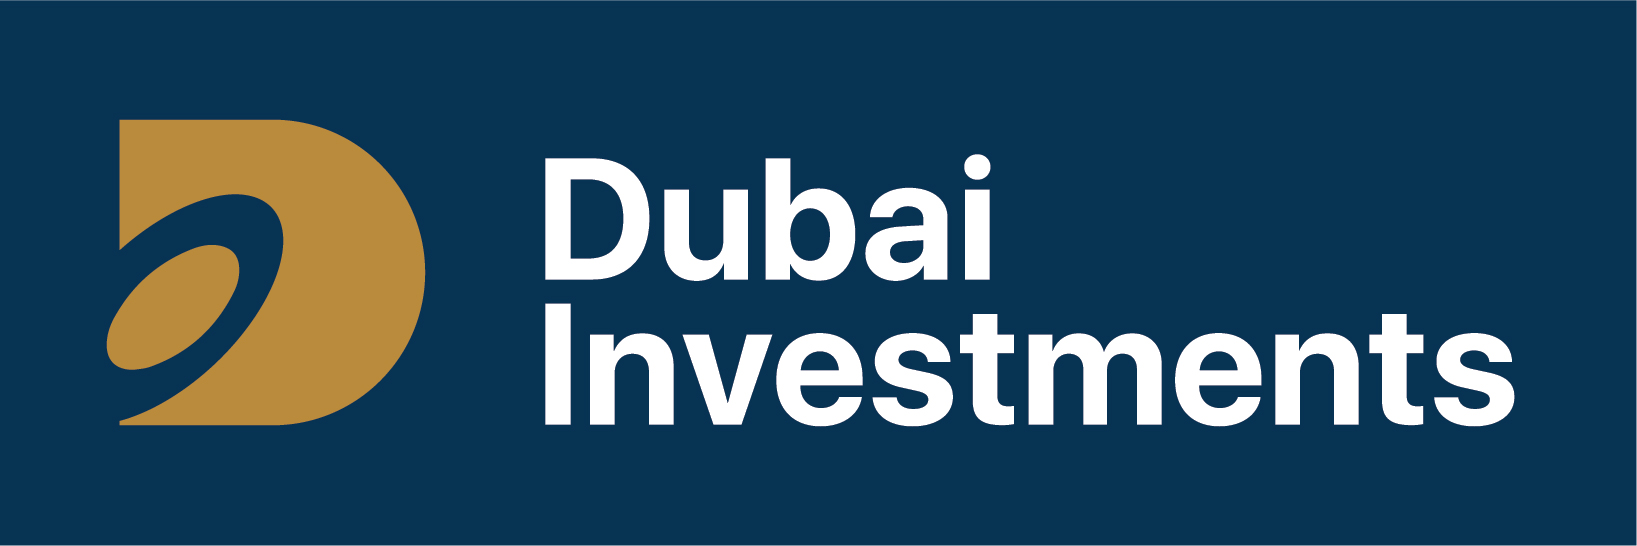 Image for Dubai Investments Sustainability Report 2021 Highlights Water Use Efficiency With 44% Recycled And Reused